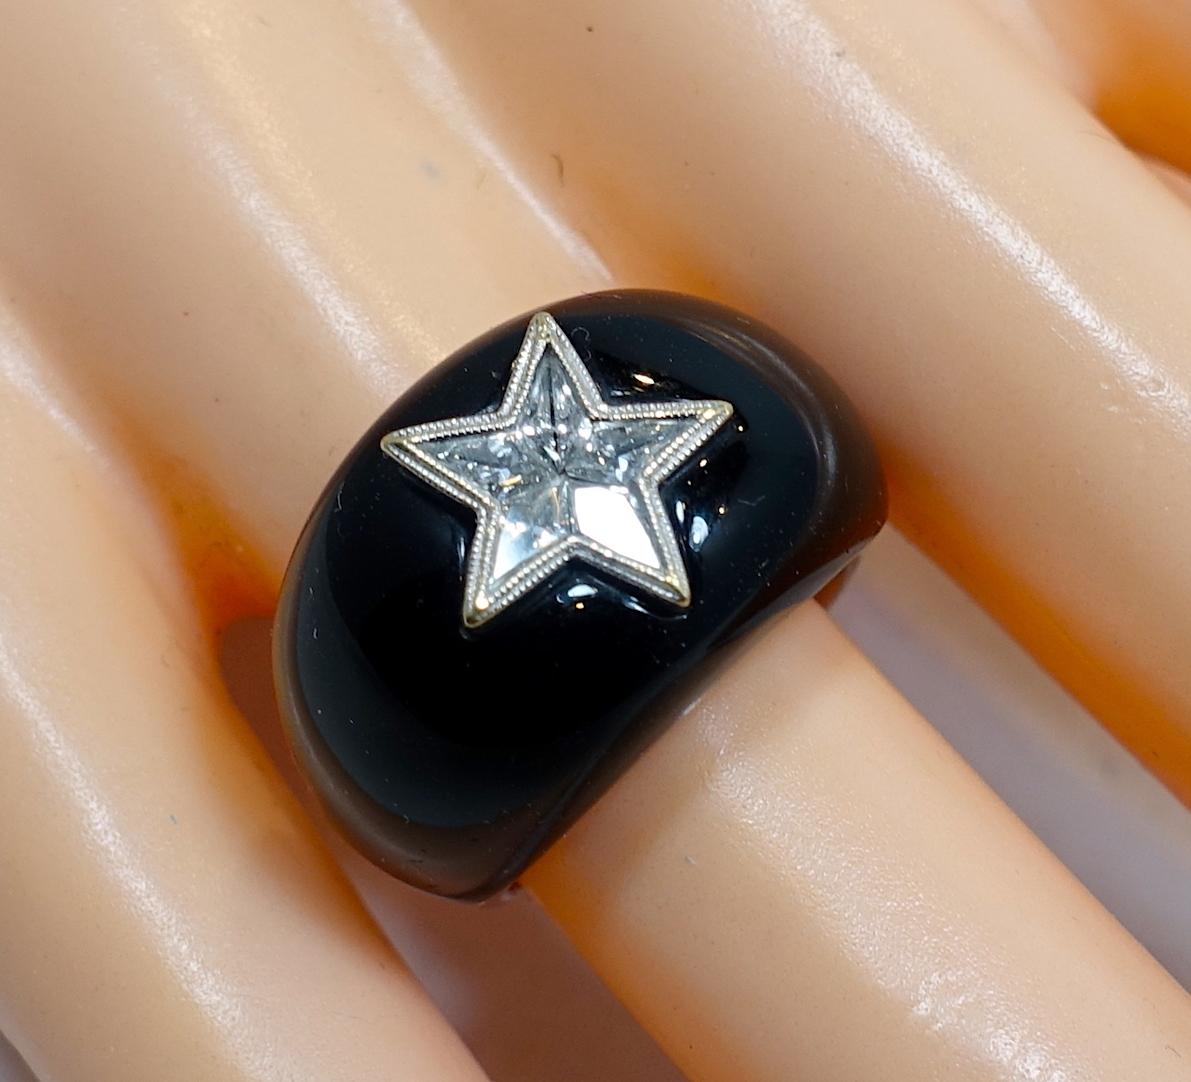 As soon as I saw this ring, I knew it was a rare piece, featuring a center diamond star in onyx on a 14kt white gold setting.  A size 6, this ring measures 1/2” wide and is in excellent condition.